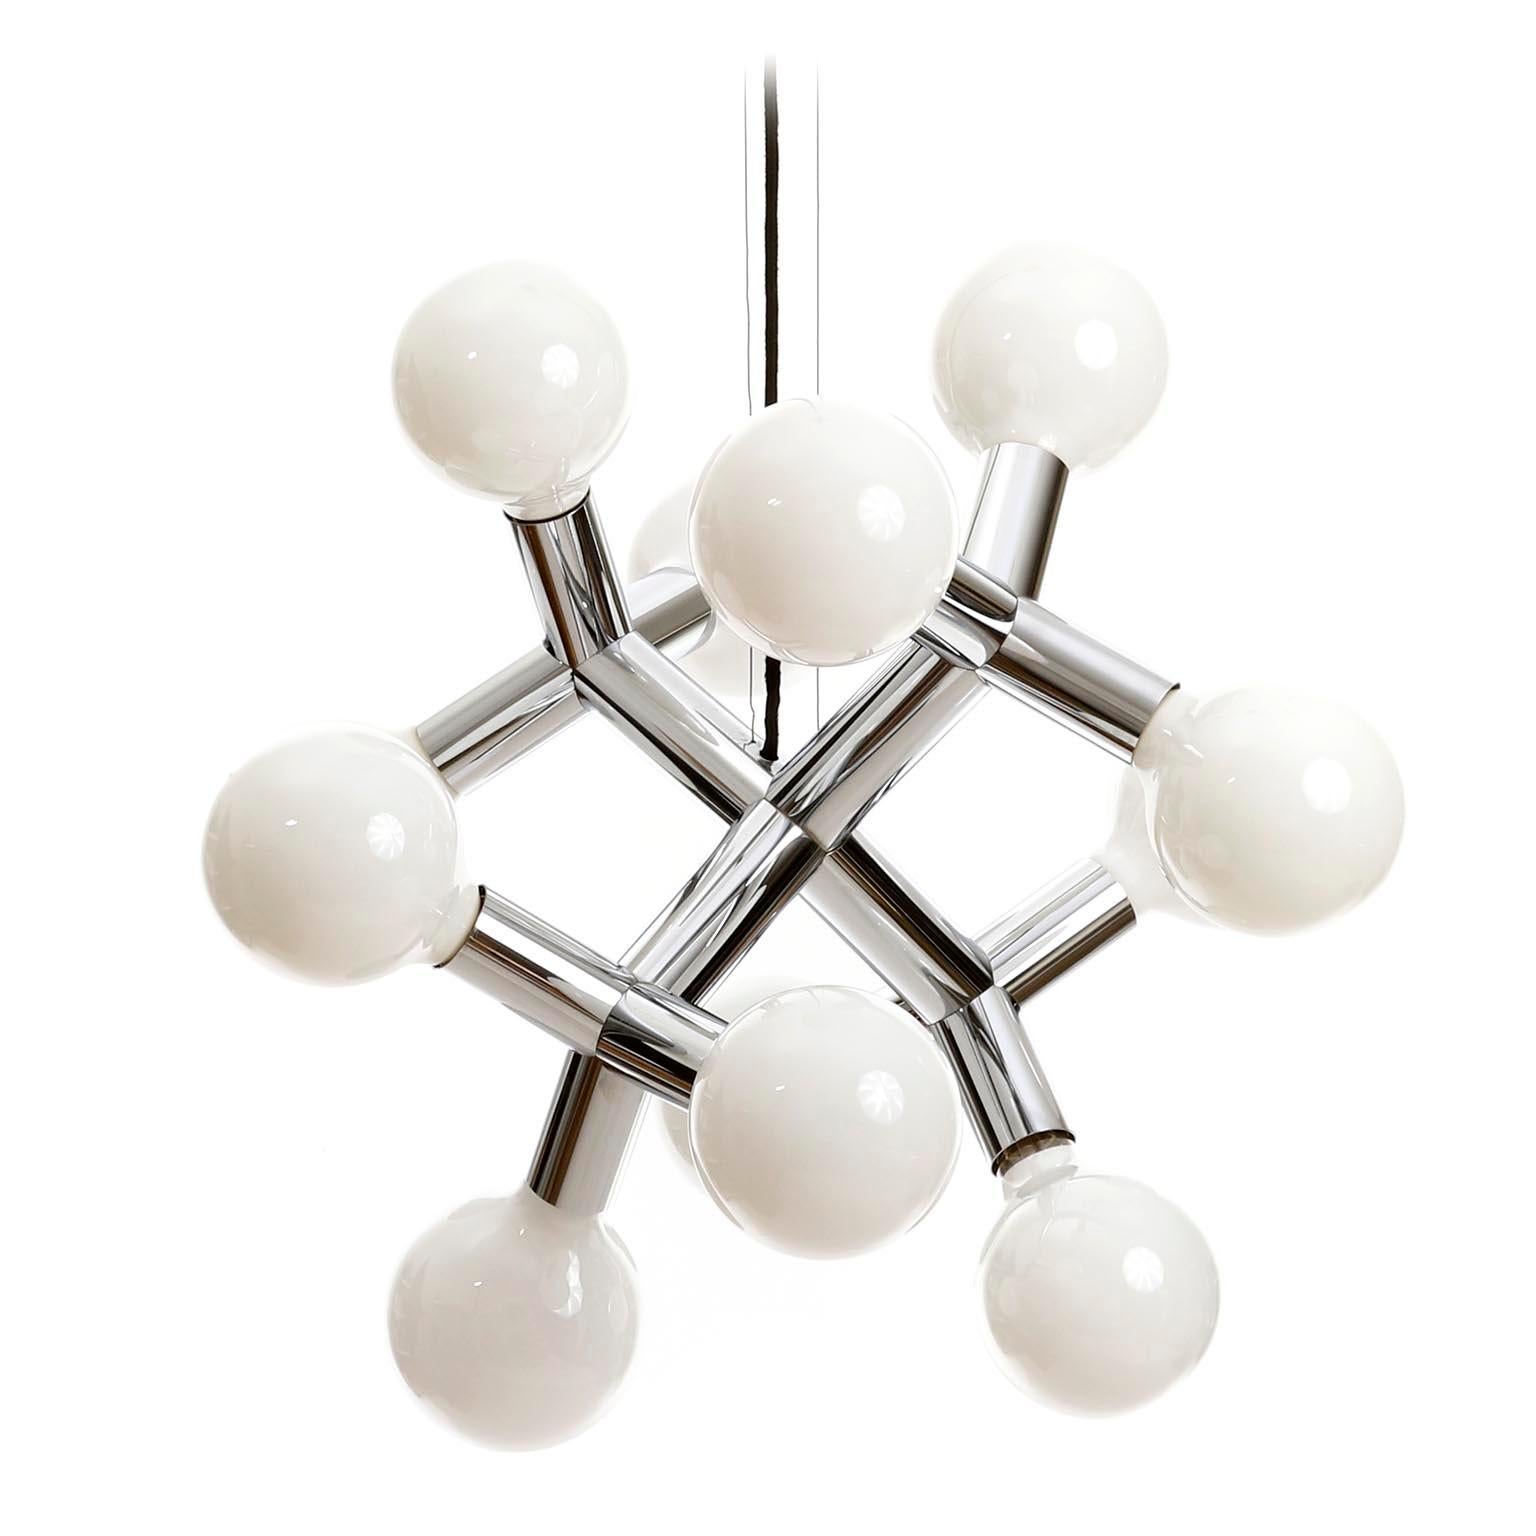 Atomic Pendant Light Chandelier by Kalmar, Polished Chrome, 1970s, One of Four For Sale 1